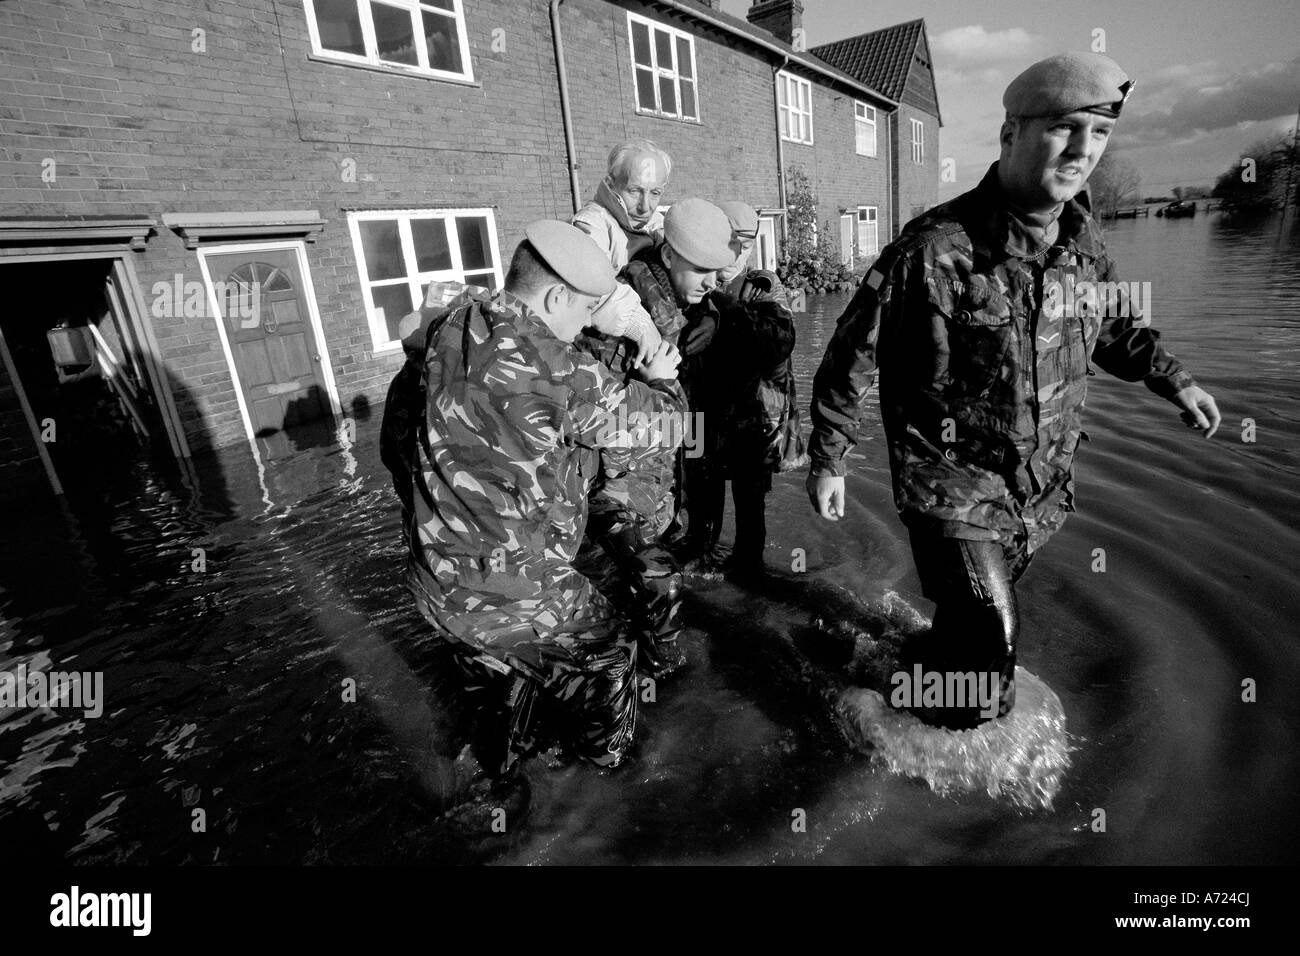 Soldiers rescue an elderly man from floodwaters Stock Photo